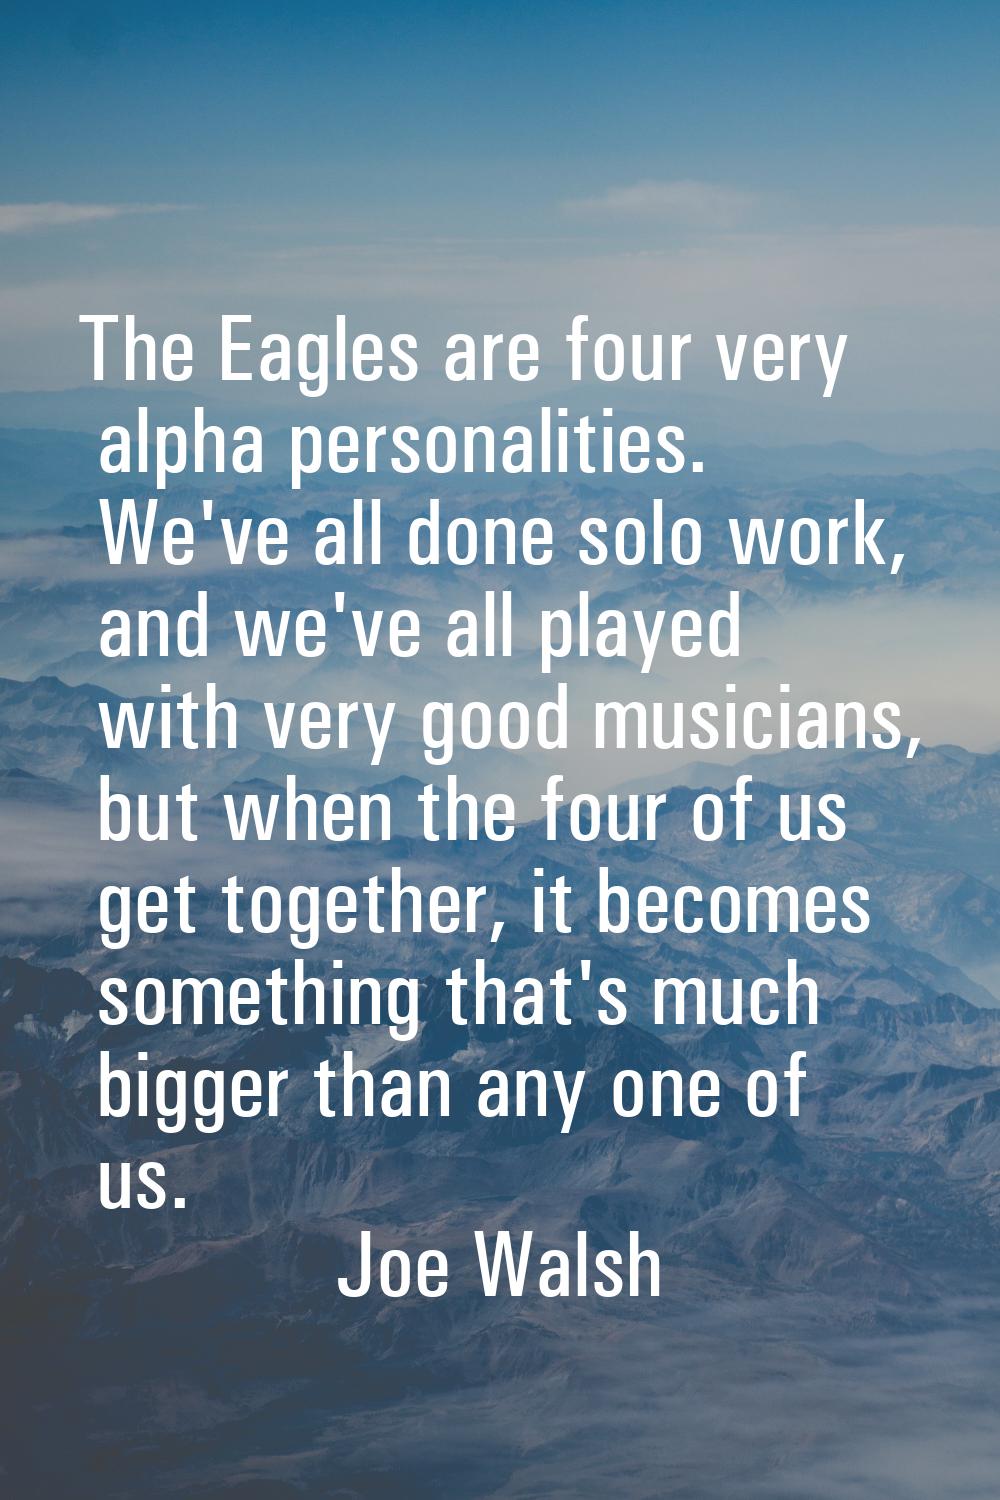 The Eagles are four very alpha personalities. We've all done solo work, and we've all played with v